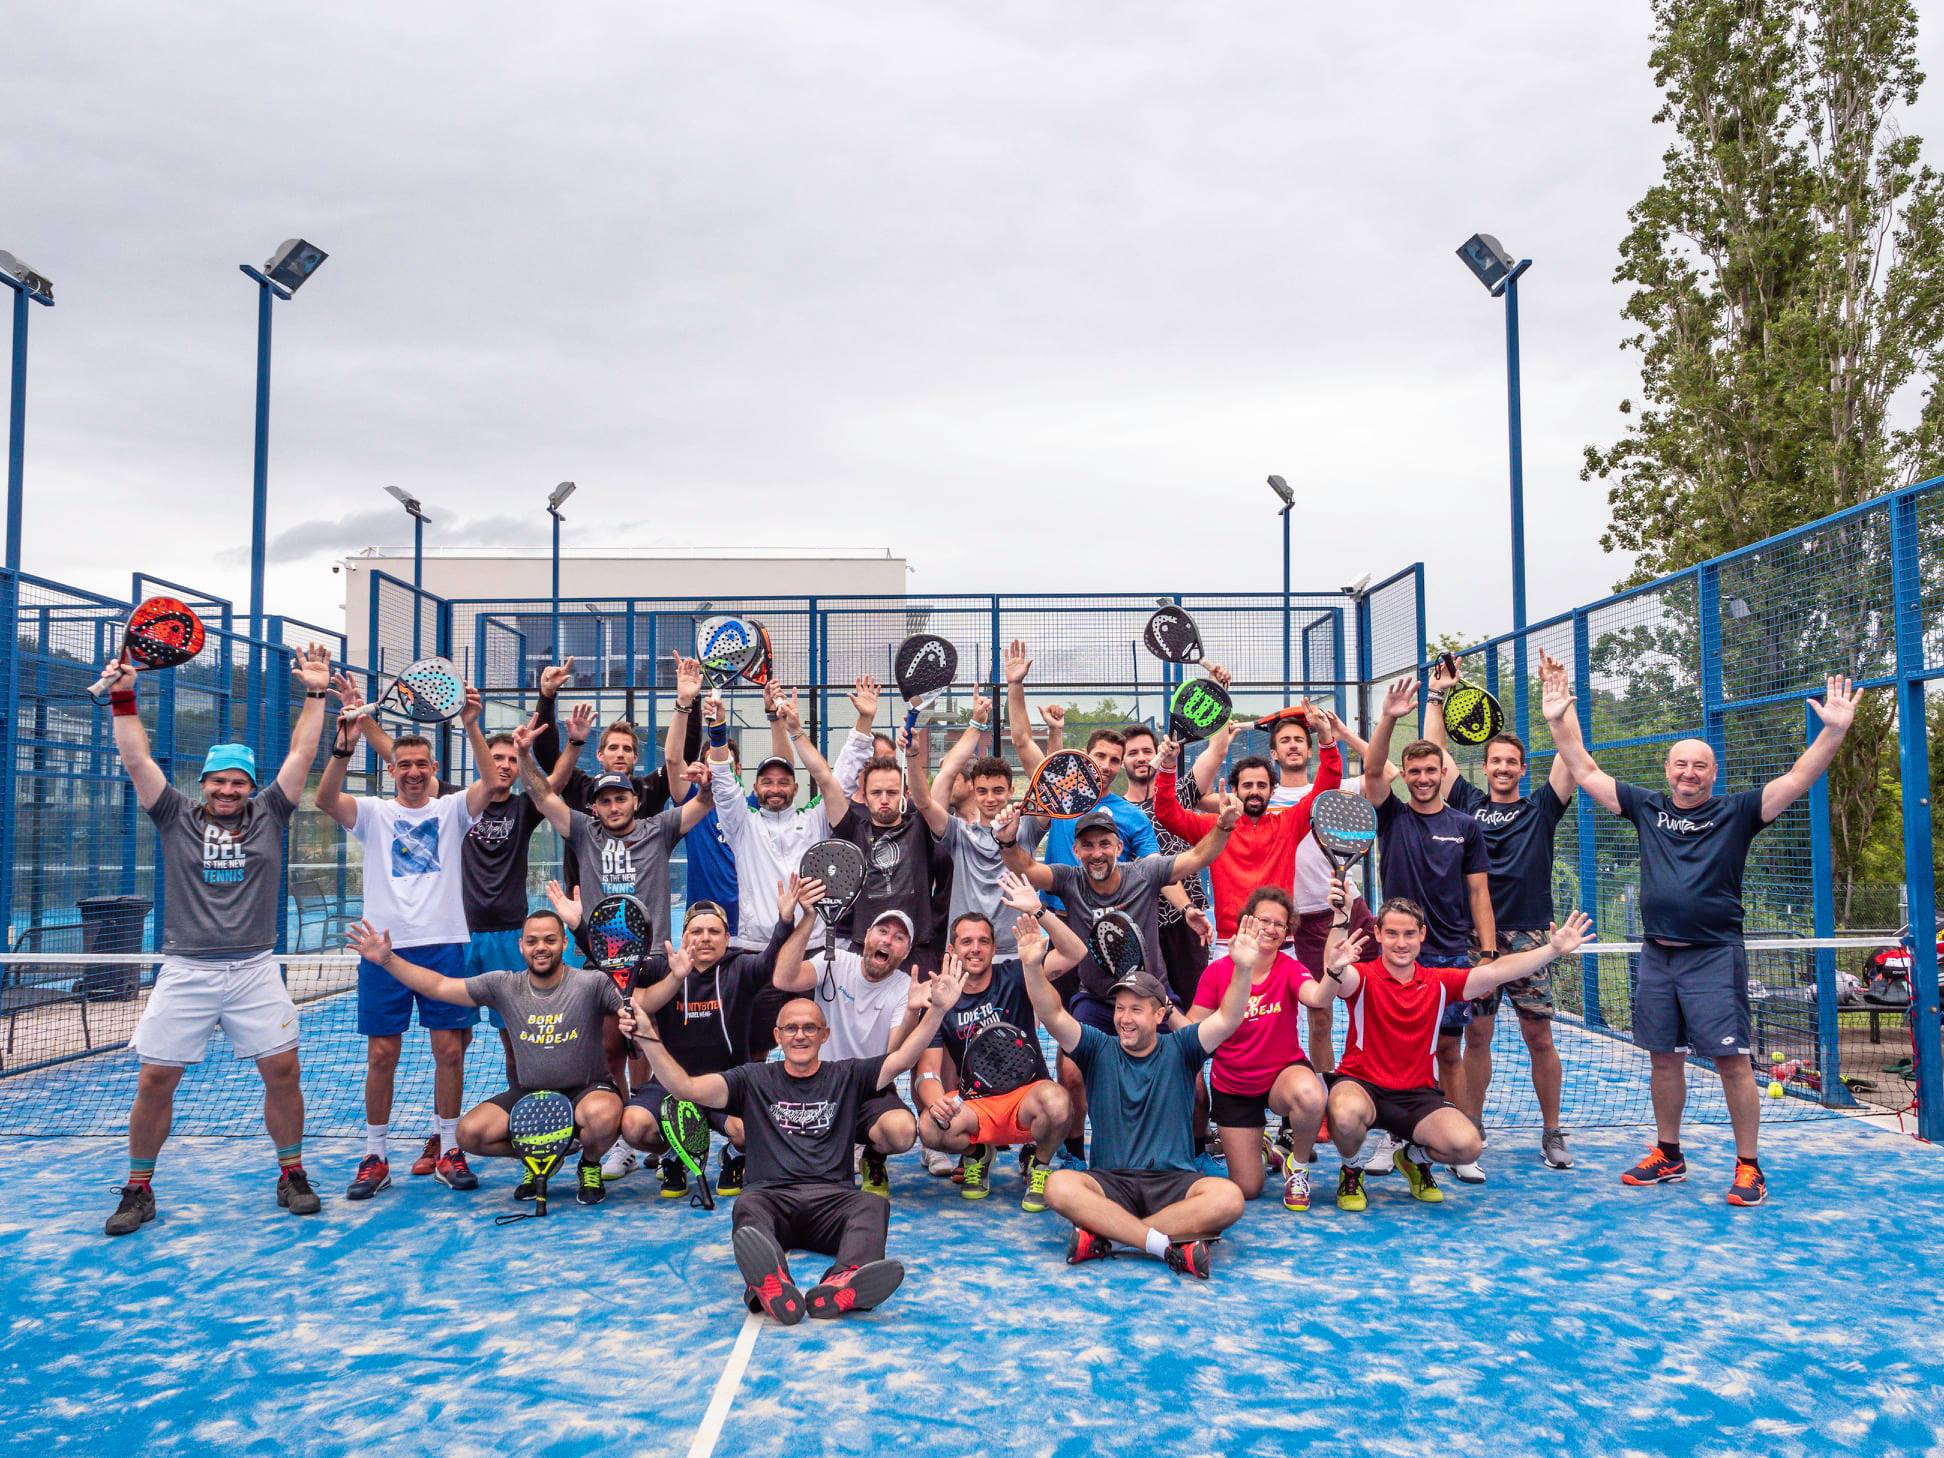 STAGE PADEL EXPERIENCE: 3 1/2 days of intense happiness!